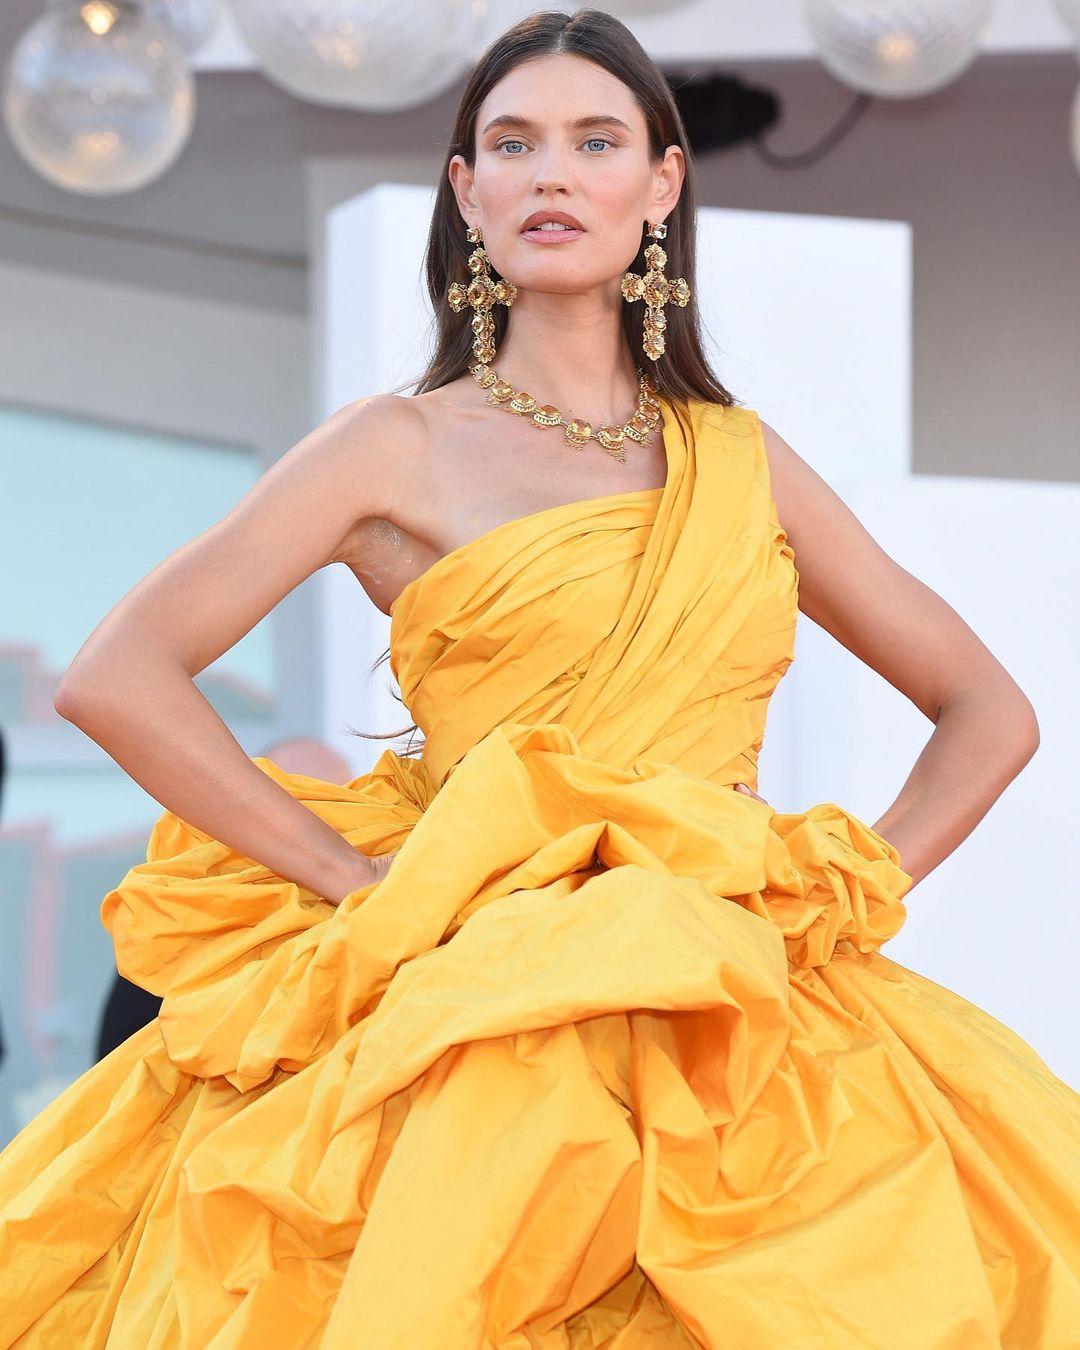 
 Bianca Balti is a name synonymous with sun-drenched Italian beauty. Little wonder then that the catwalk veteran has spent the best part of a decade fronting one of fashion's most iconic summer fragrances.

At the link in our bio, the 38-year-old mother of two opens up about what she really thinks of the famous Italian beauty aesthetic, her desert island must-haves, and why she's not worried that her teenage daughter is far more proficient than her when it comes to make-up. 
 